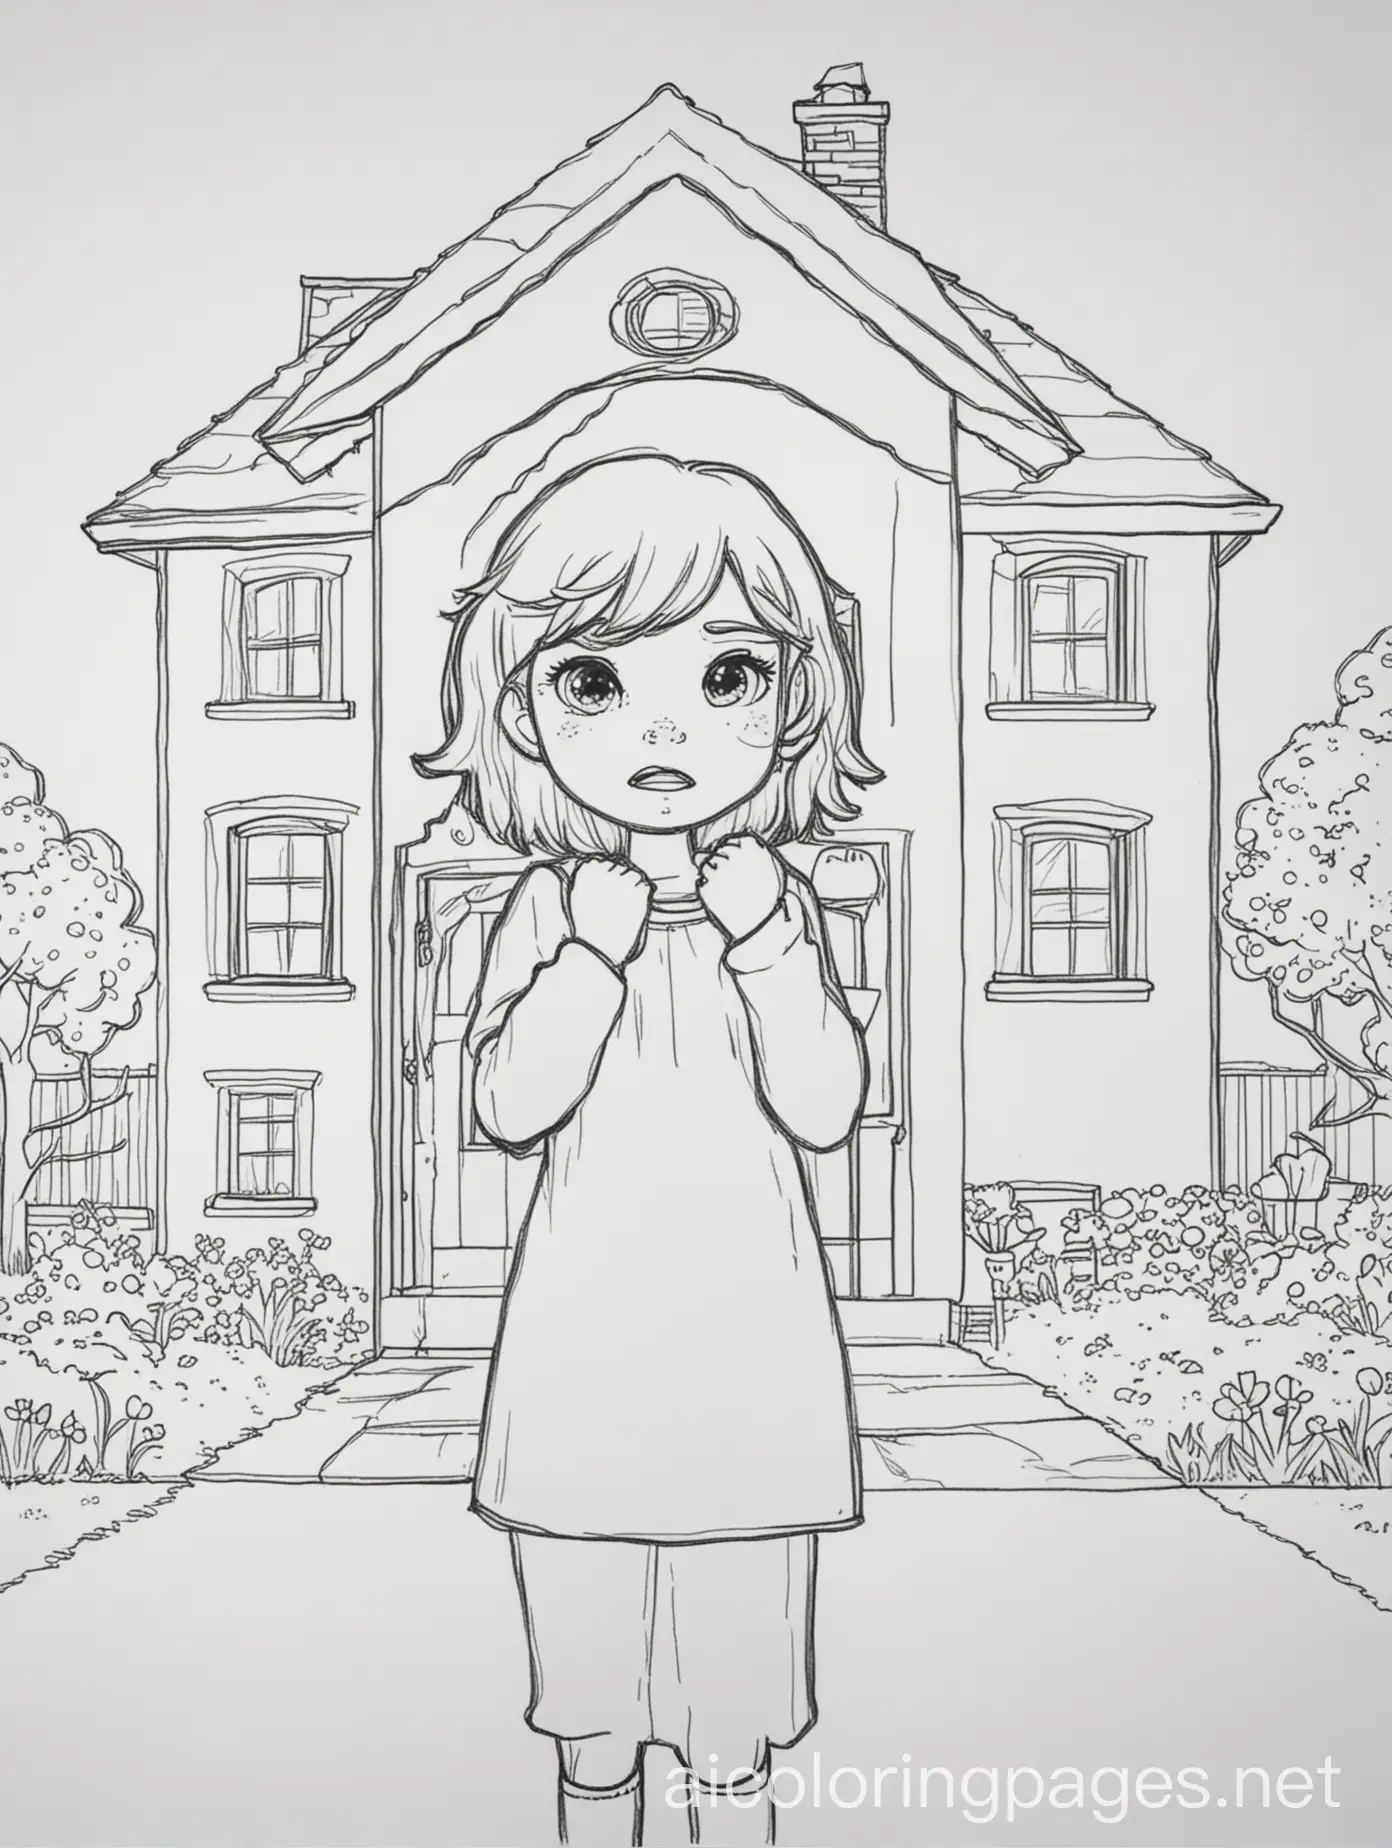 A girl standing with her fists up to her eyes crying with a house behind her. Coloring Page, black and white, line art, white background, Simplicity, Ample White Space. , making it simple for kids to color without too much difficulty. Very simple design. Big lines with no dark filling , Coloring Page, black and white, line art, white background, Simplicity, Ample White Space. The background of the coloring page is plain white to make it easy for young children to color within the lines. The outlines of all the subjects are easy to distinguish, making it simple for kids to color without too much difficulty